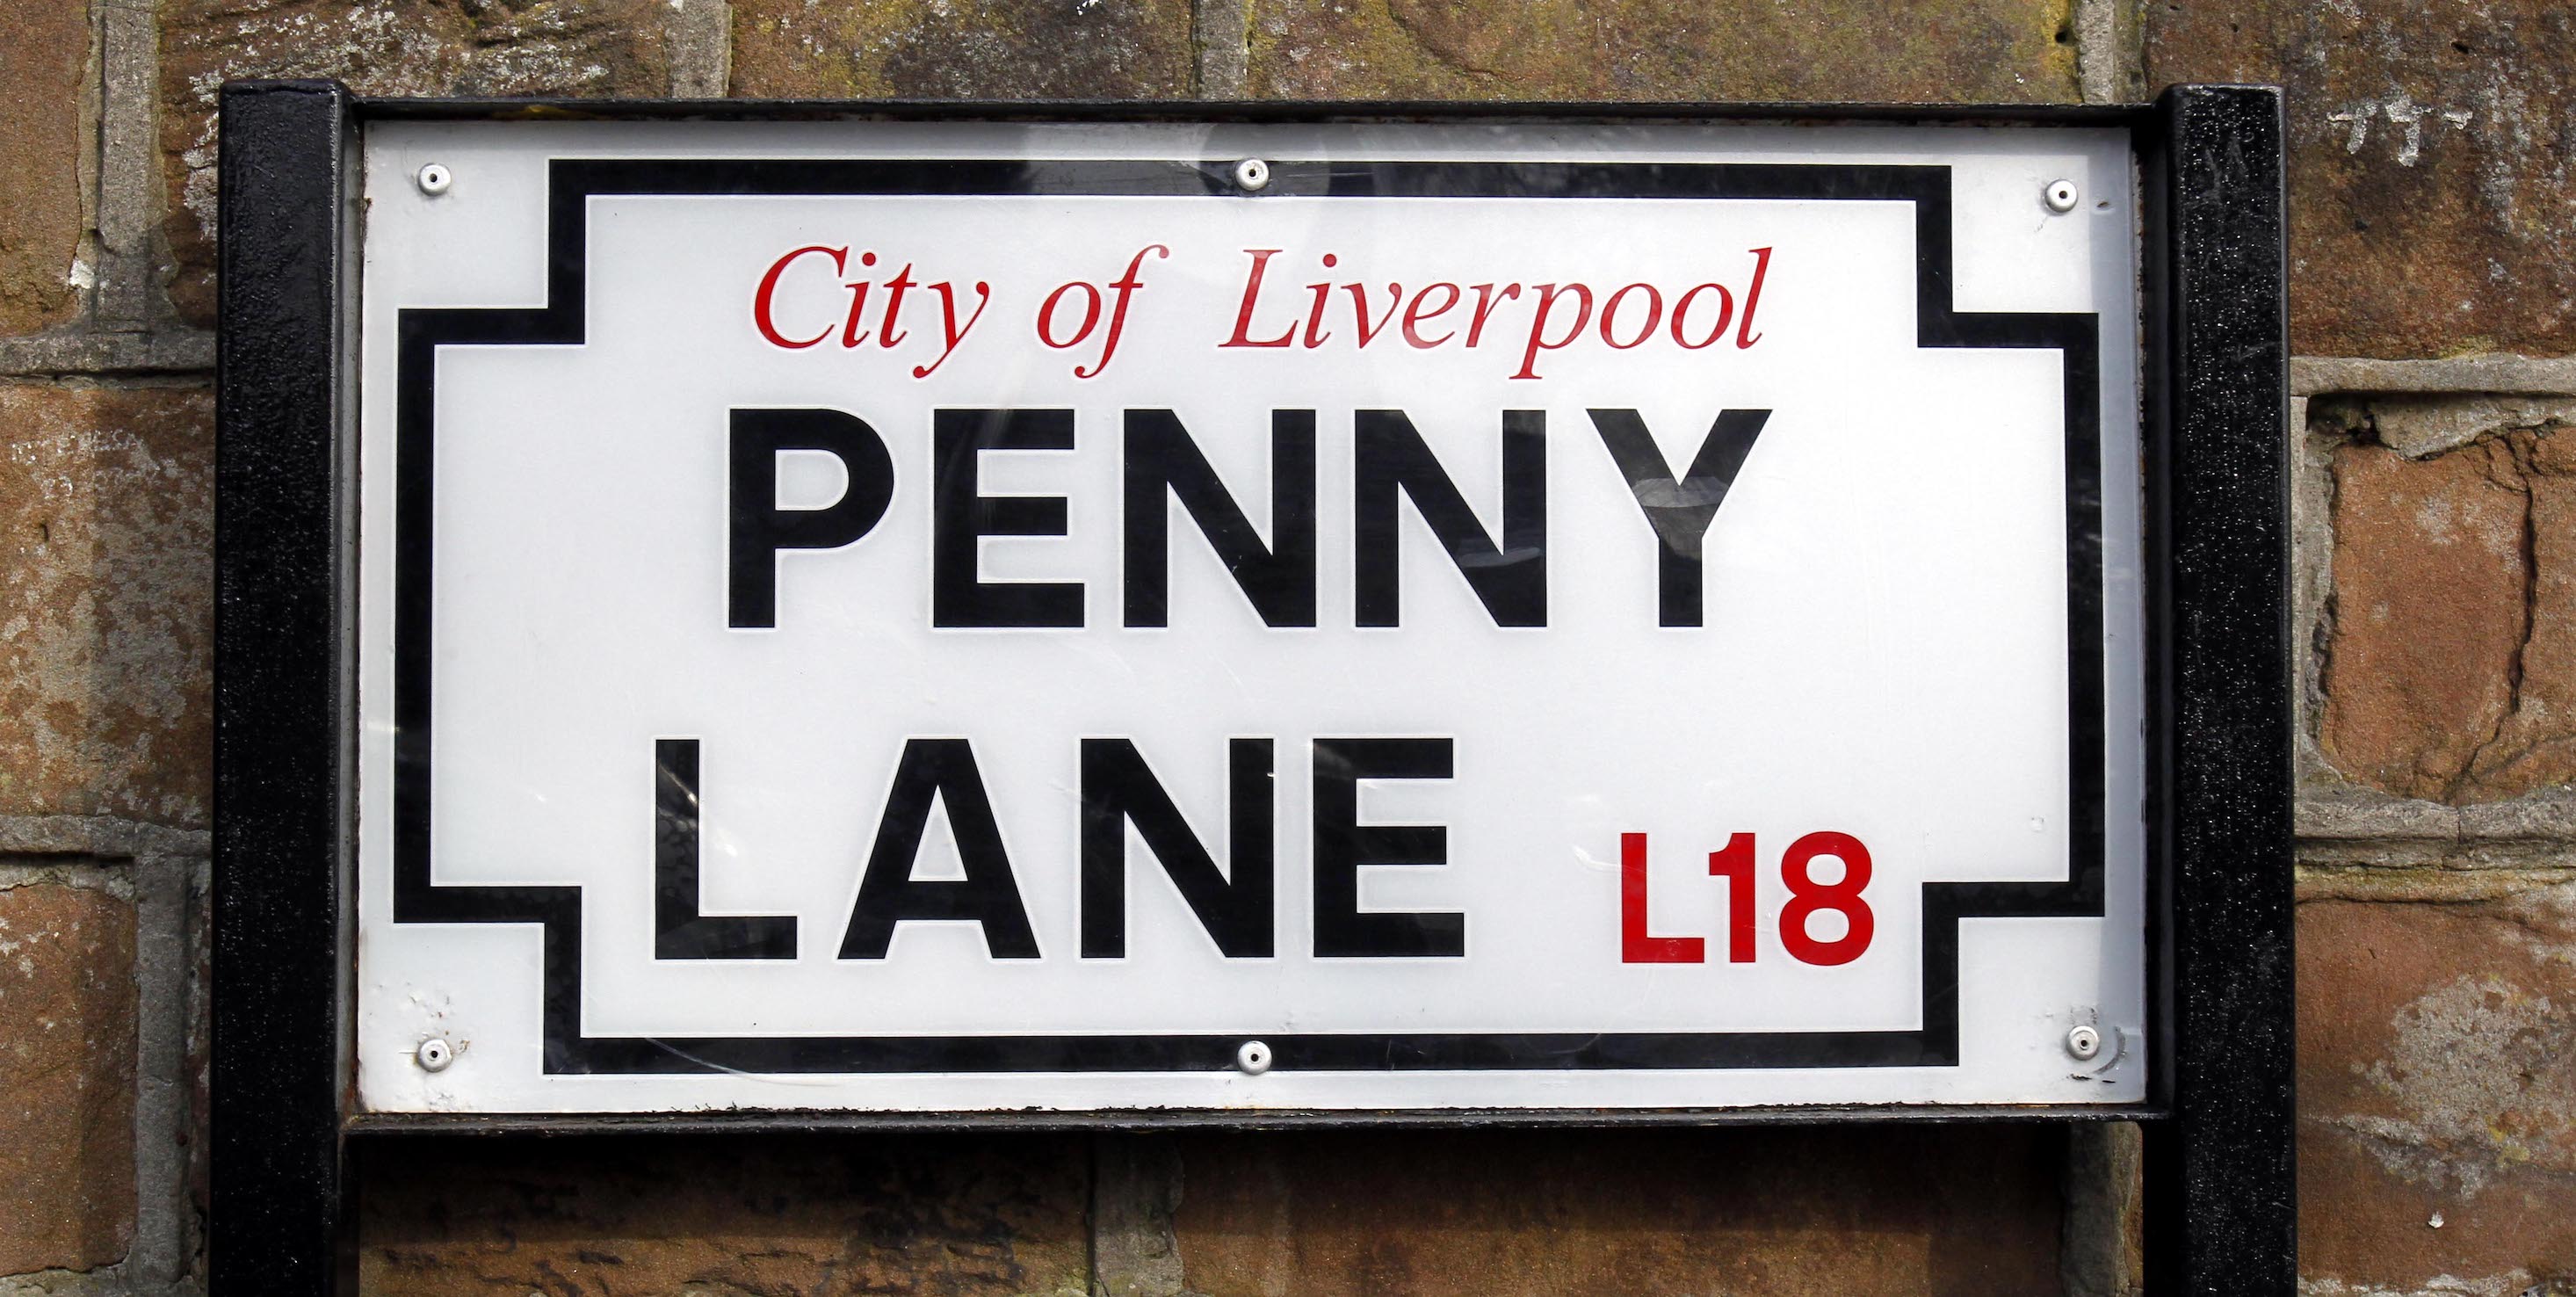 A sign for Penny Lane in Liverpool, the street made famous by The Beatles song